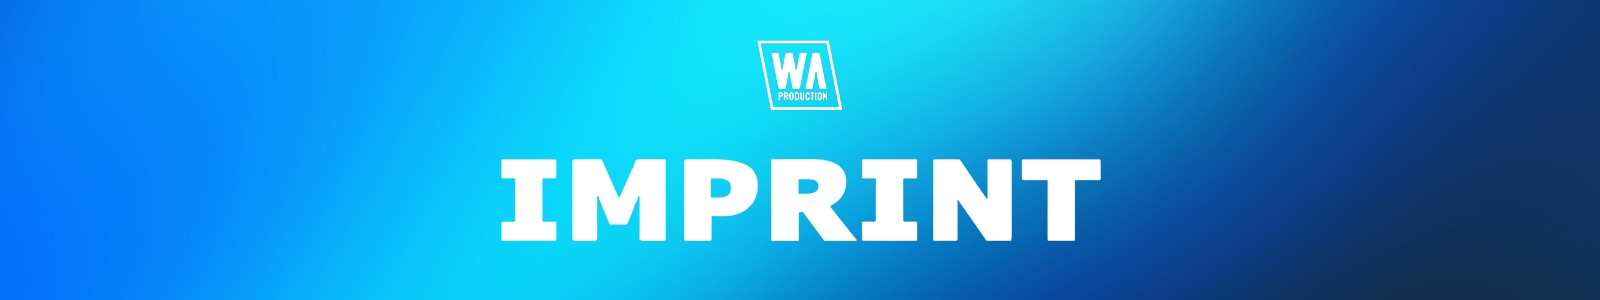 Imprint by W. A. Production